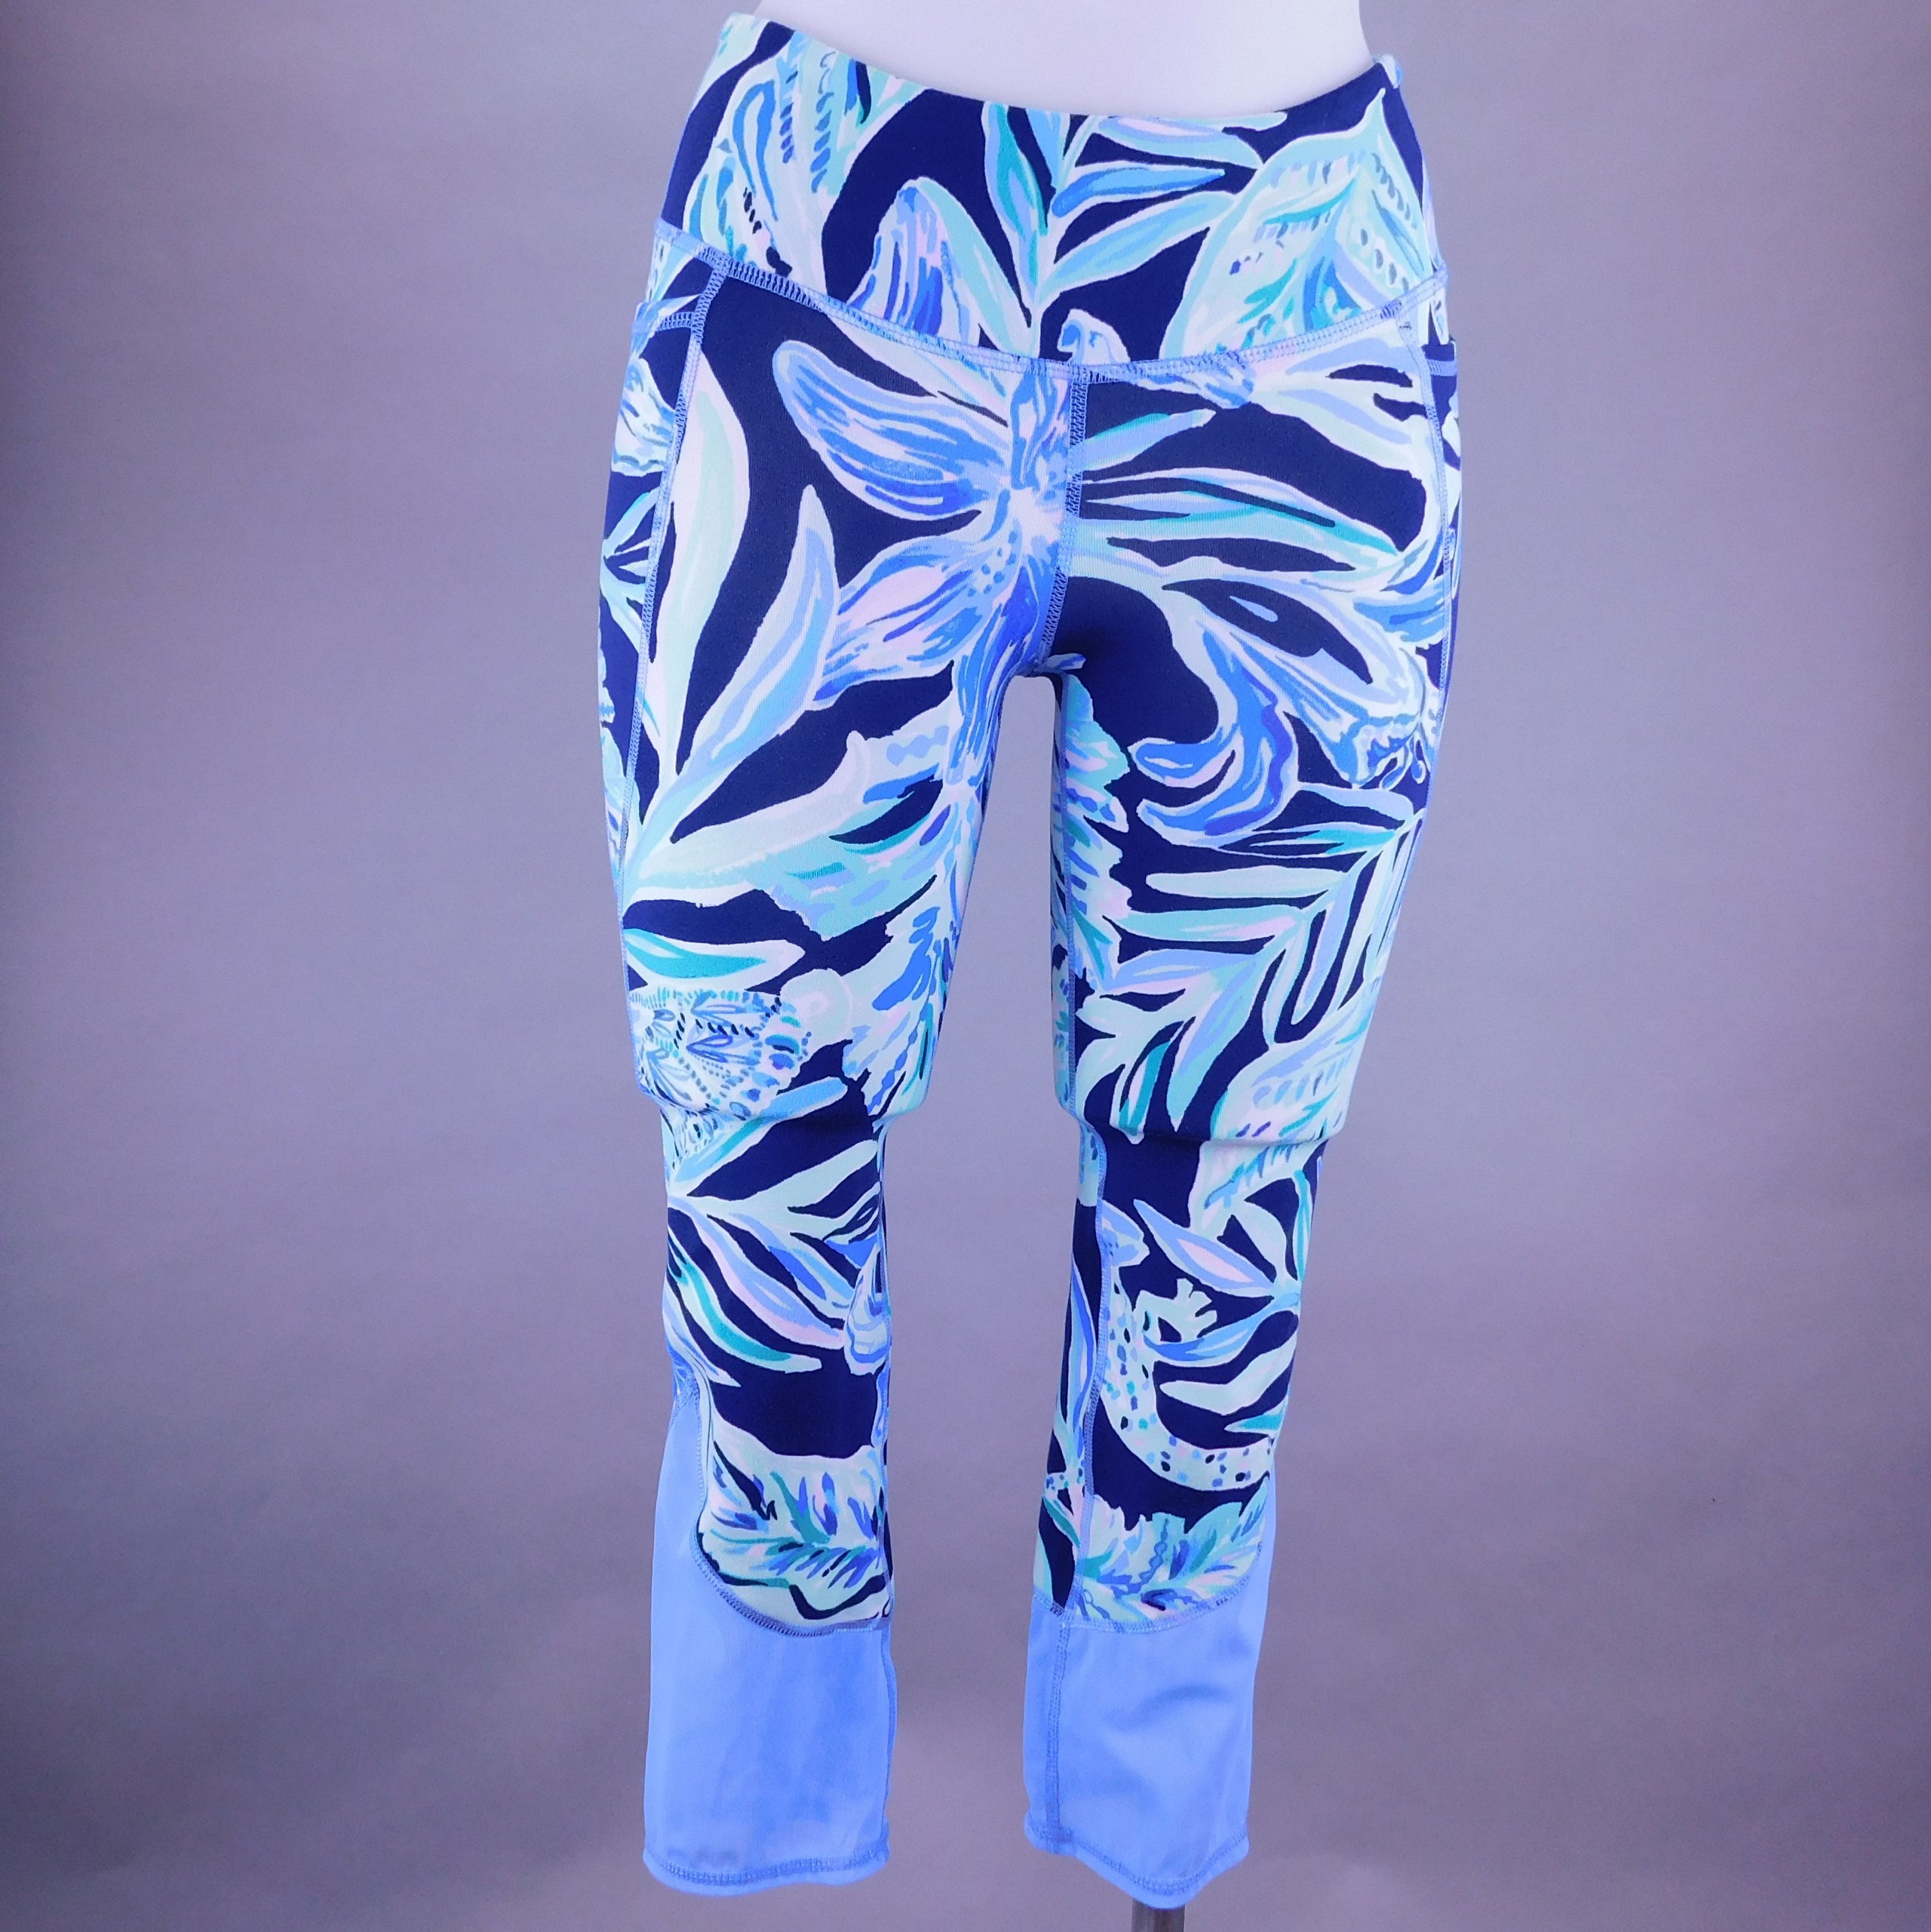 Lilly Pulitzer Luxletic Blue/Green Cropped Legging - Size XS